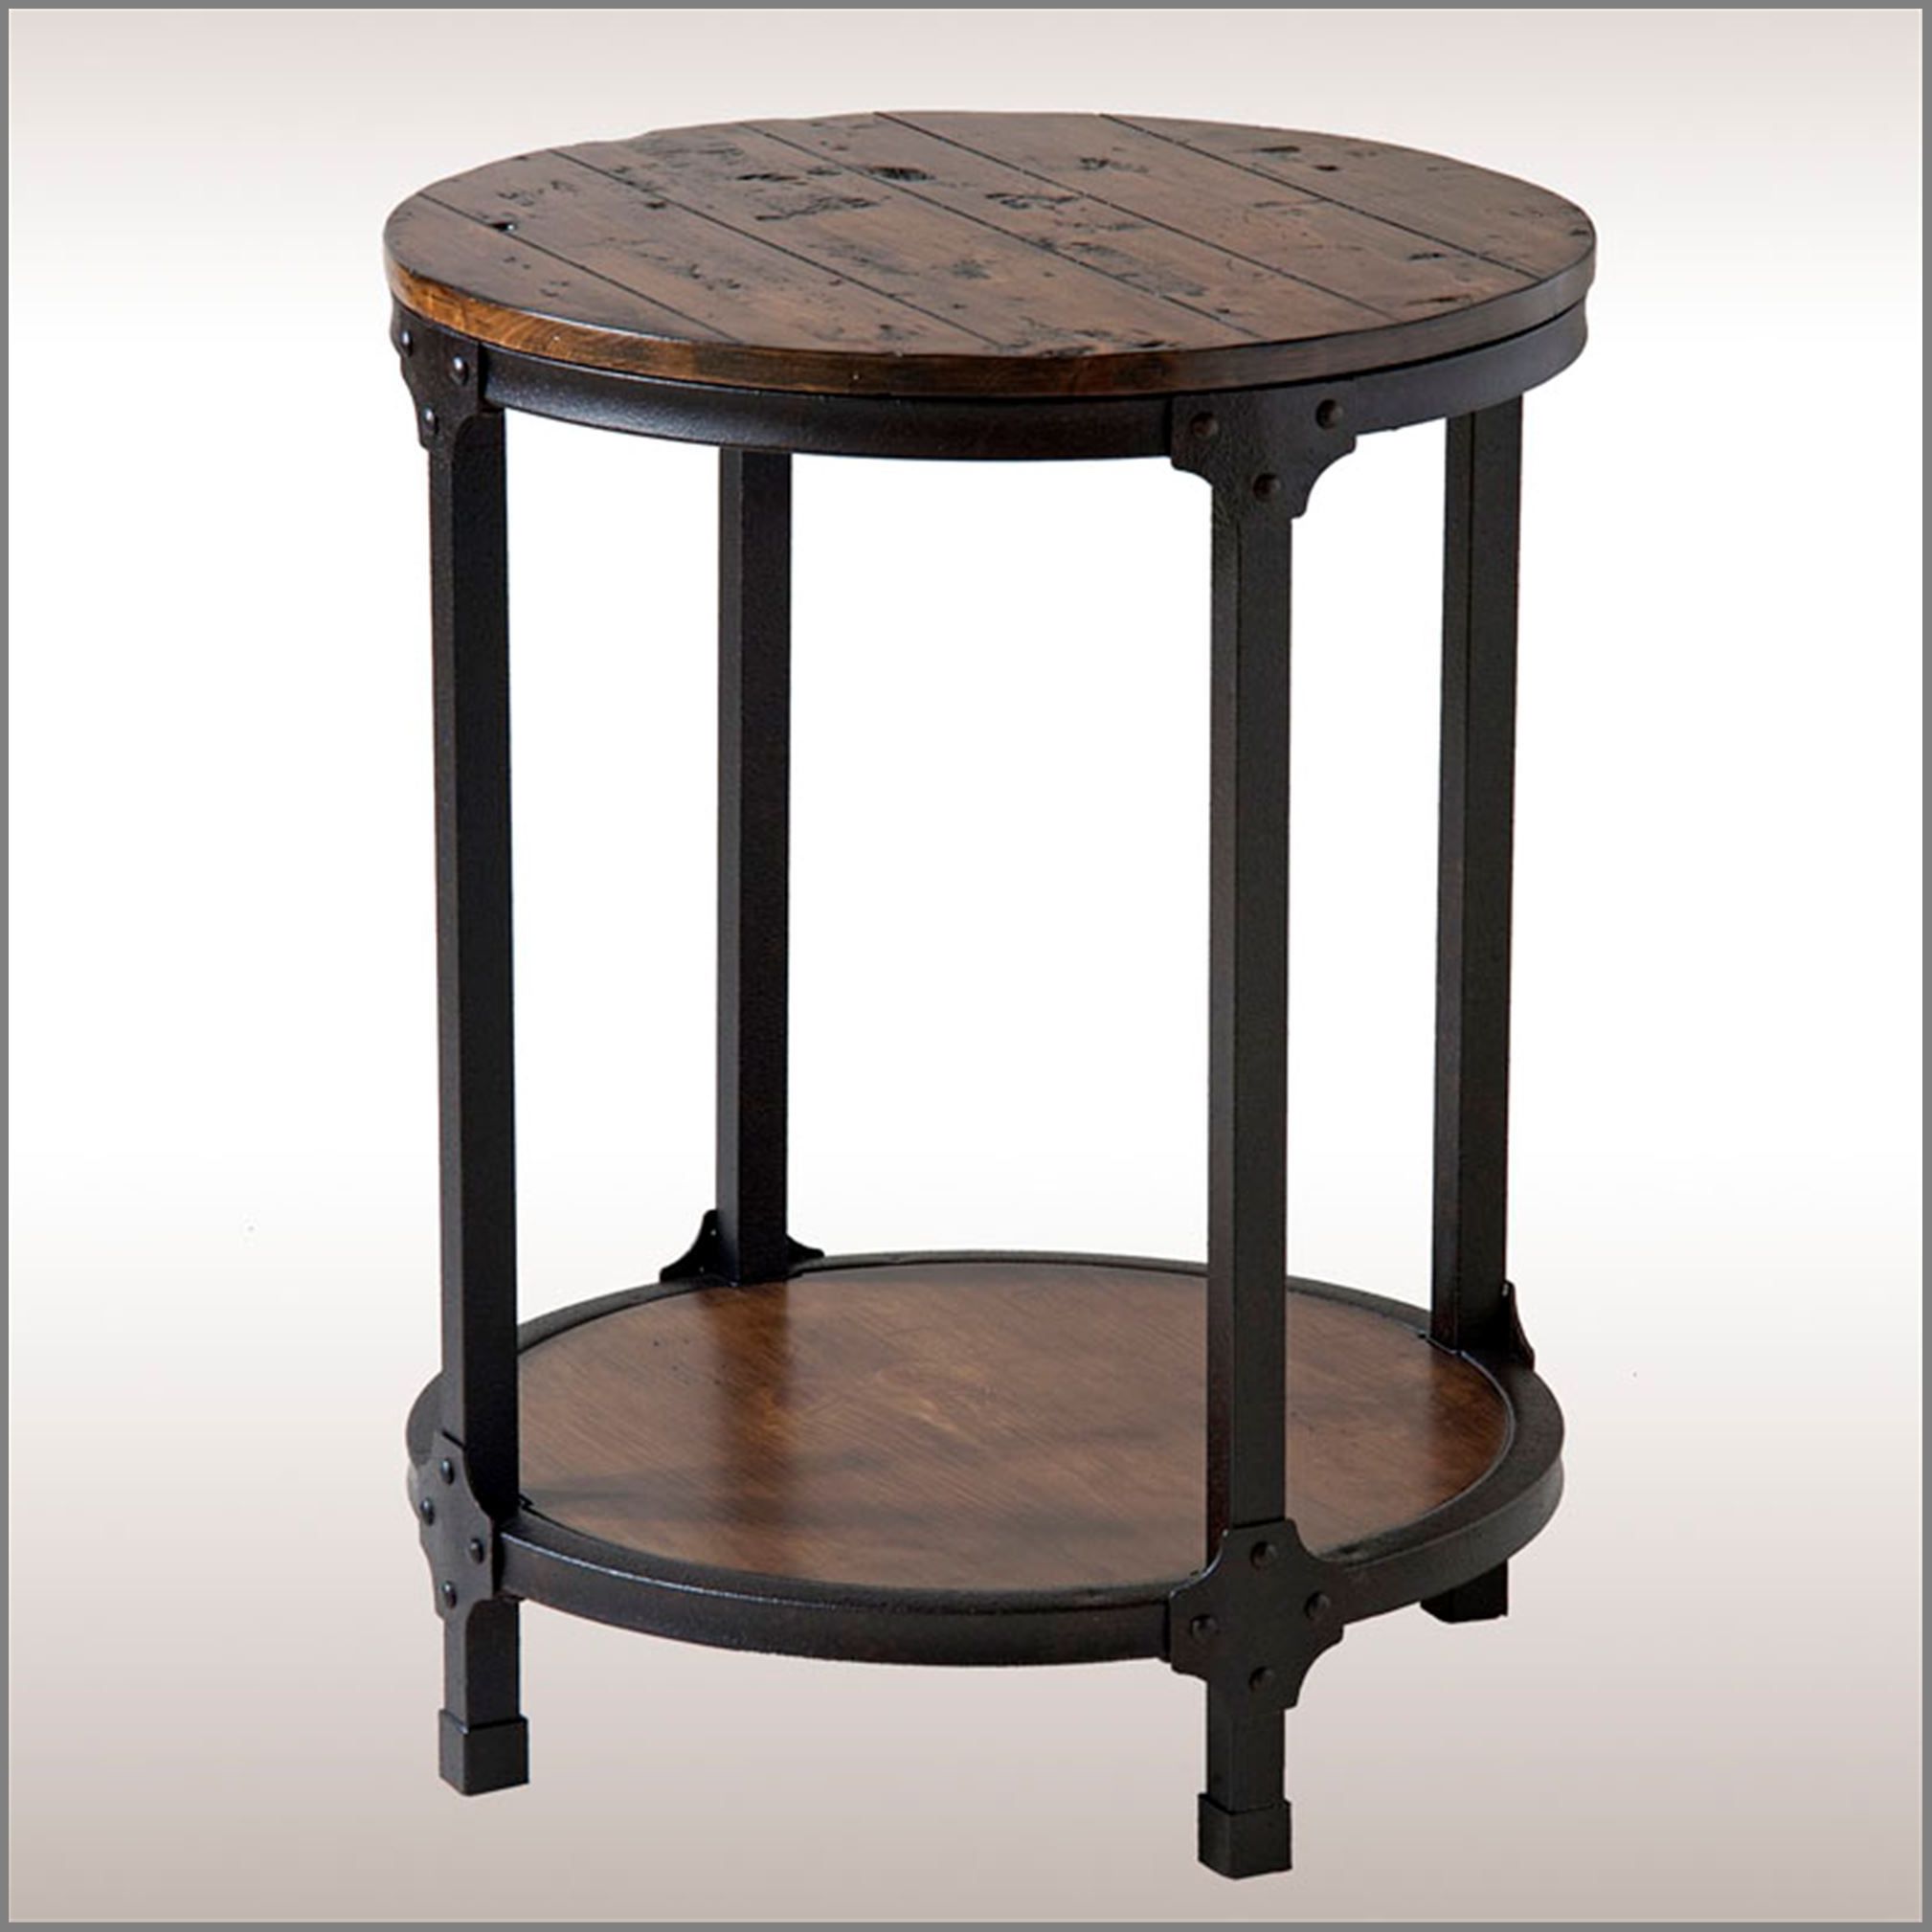 great round accent table drobasandasz best macon rustic decorating ideas pier imports teak nic teal furniture occasional chairs for living room reclaimed kitchen nest tool storage